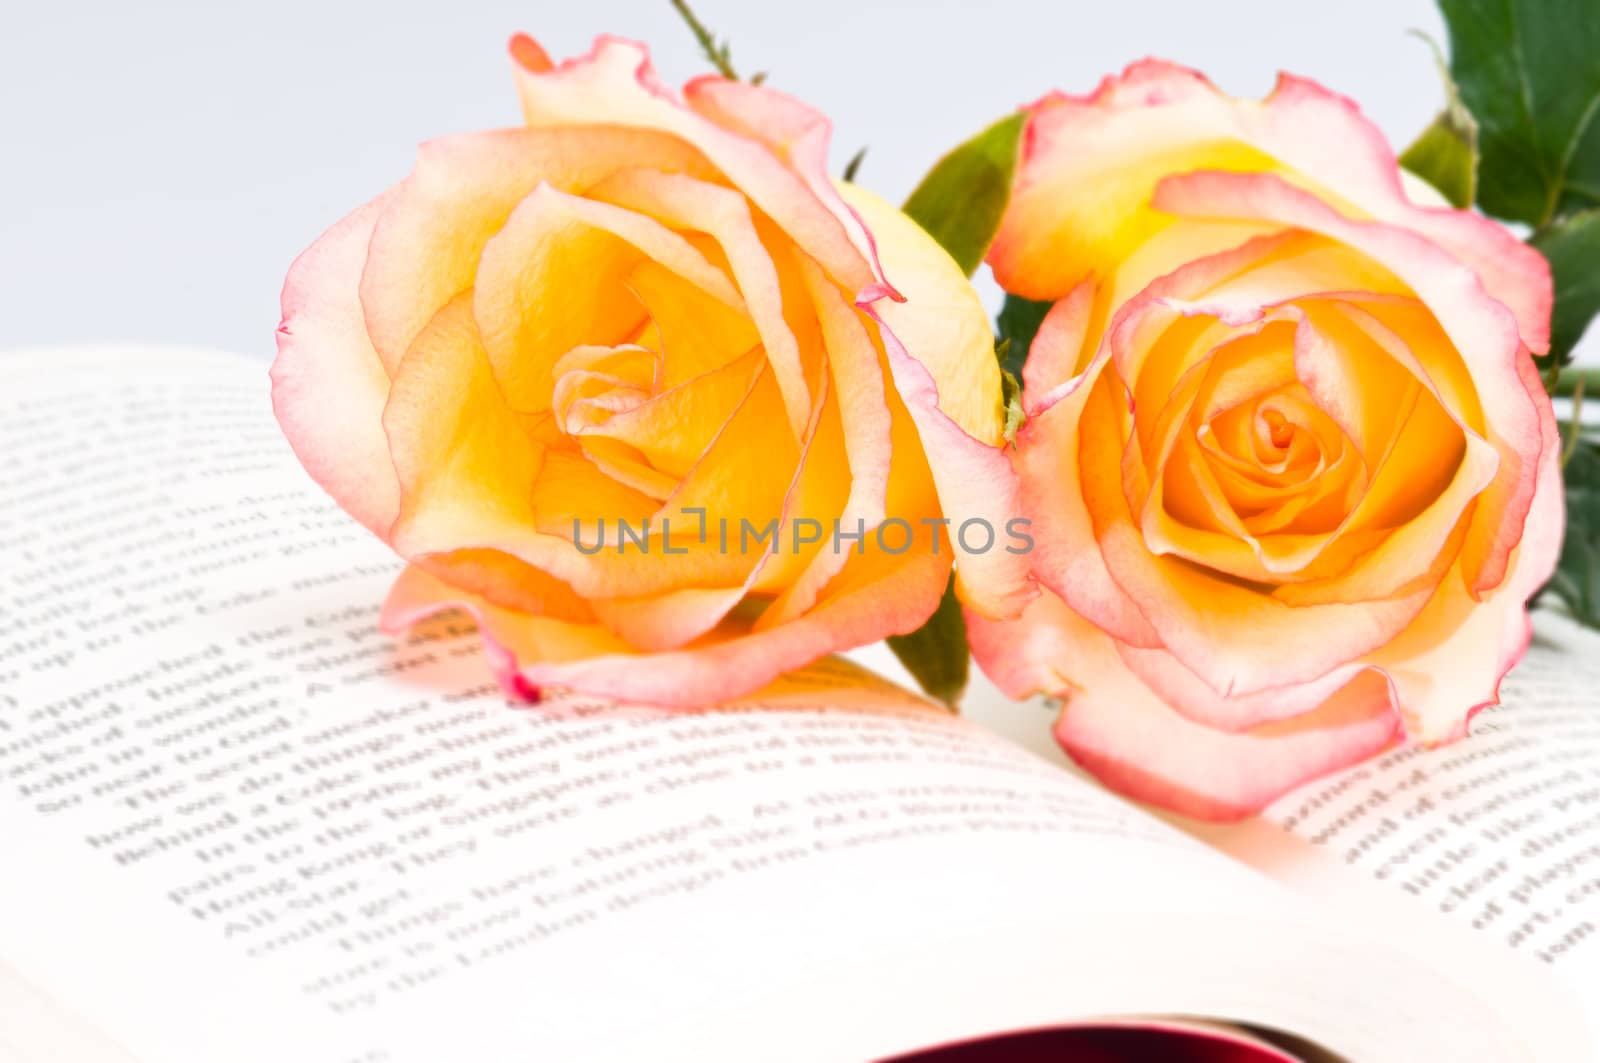 Beautiful red yellow roses over a book with green leaves